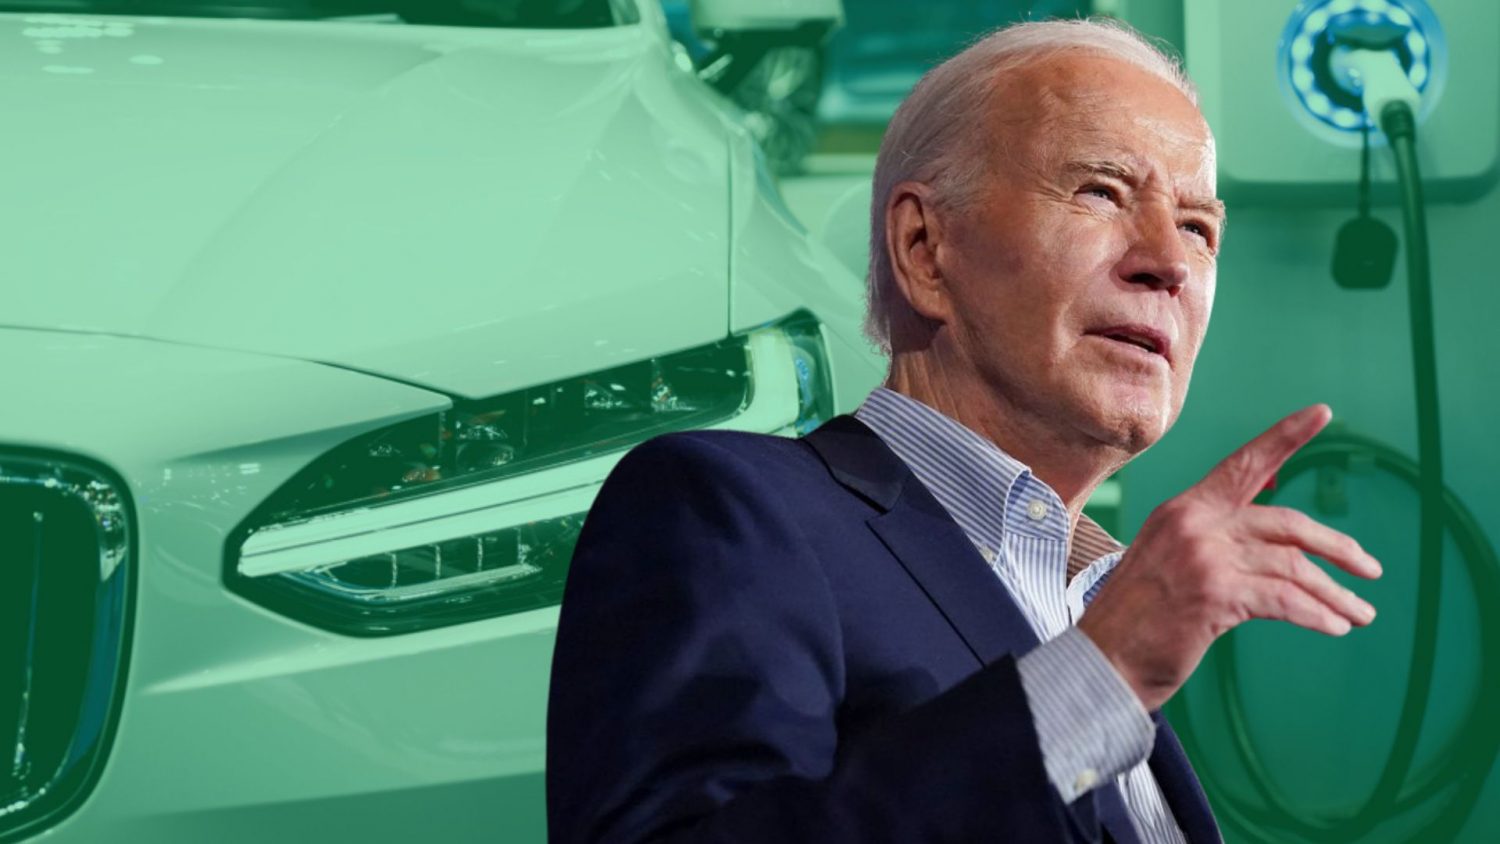 The Biden Administration has toned down proposed guidelines that would have rapidly accelerated the electric vehicle transition.